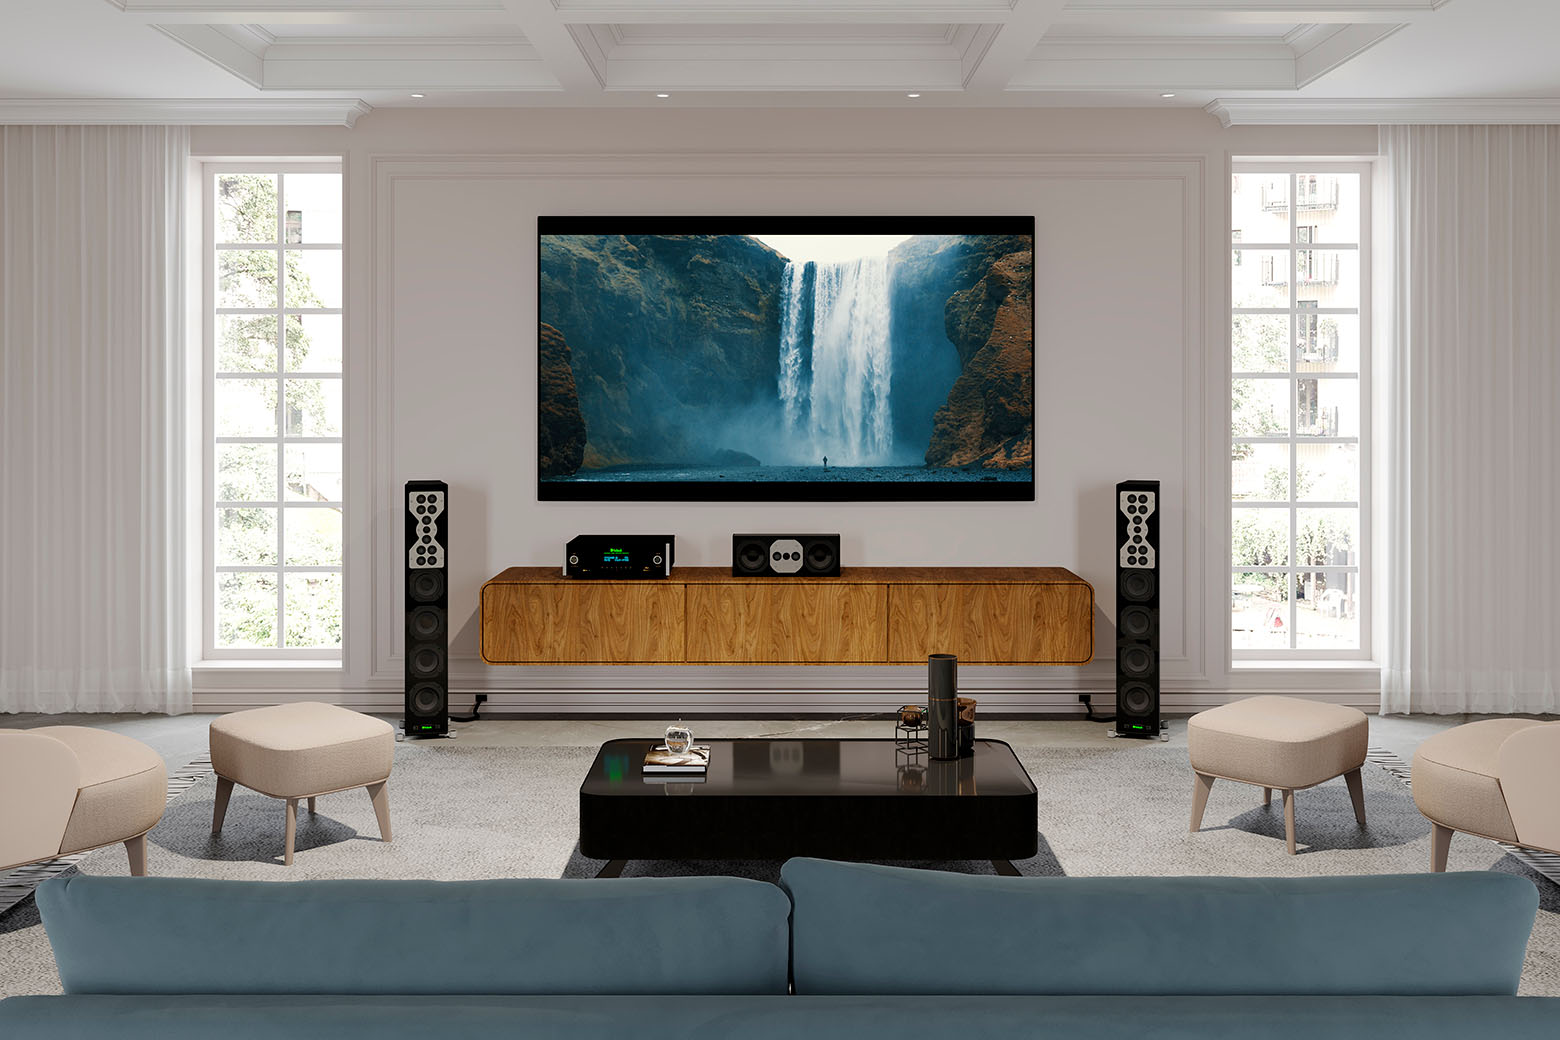 McIntosh MHT300 Home Theater Receiver in a living room